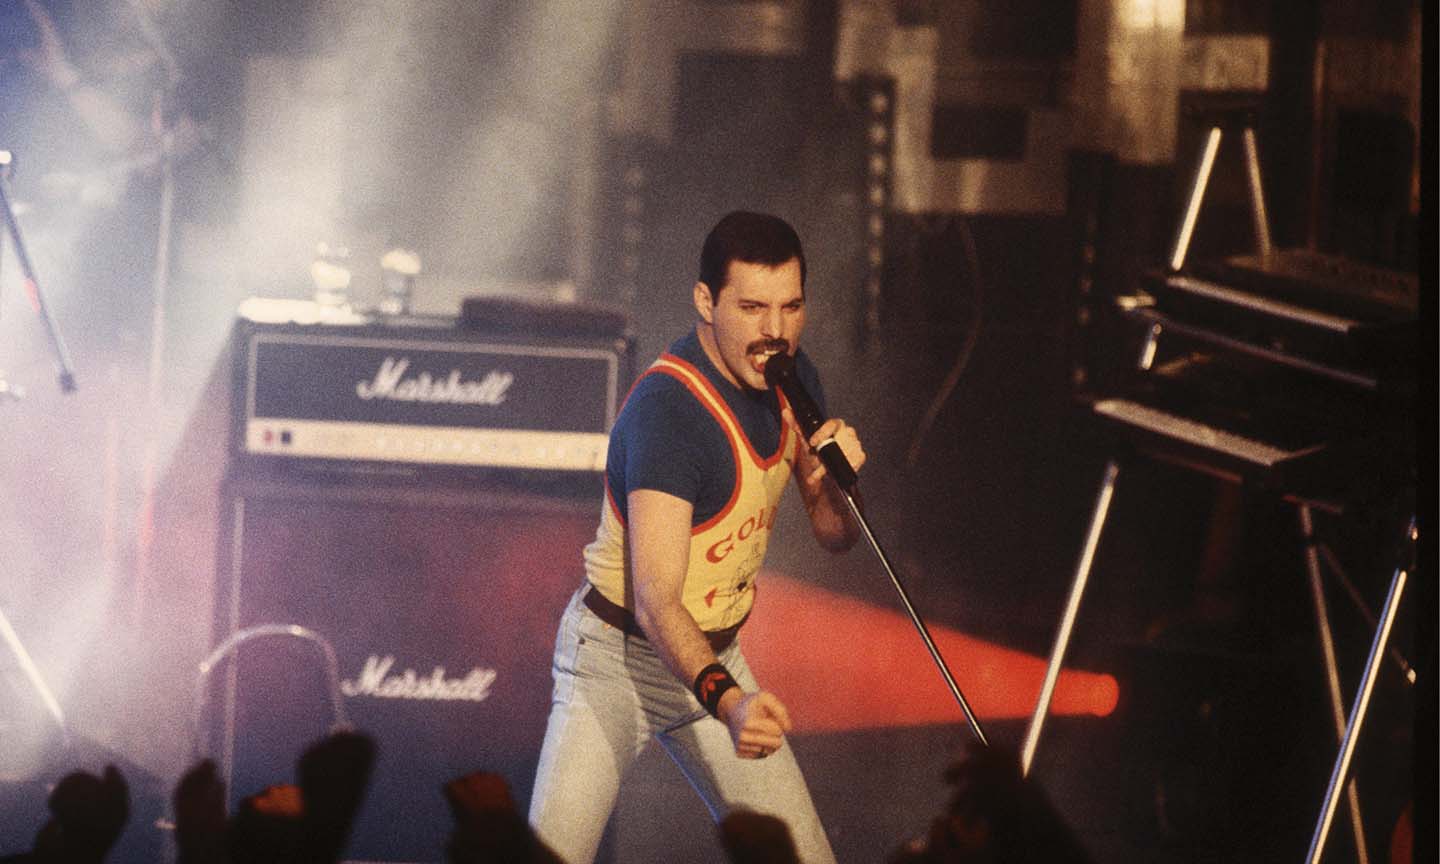 Queen’s ‘A Kind Of Magic’: The Story Behind The Song